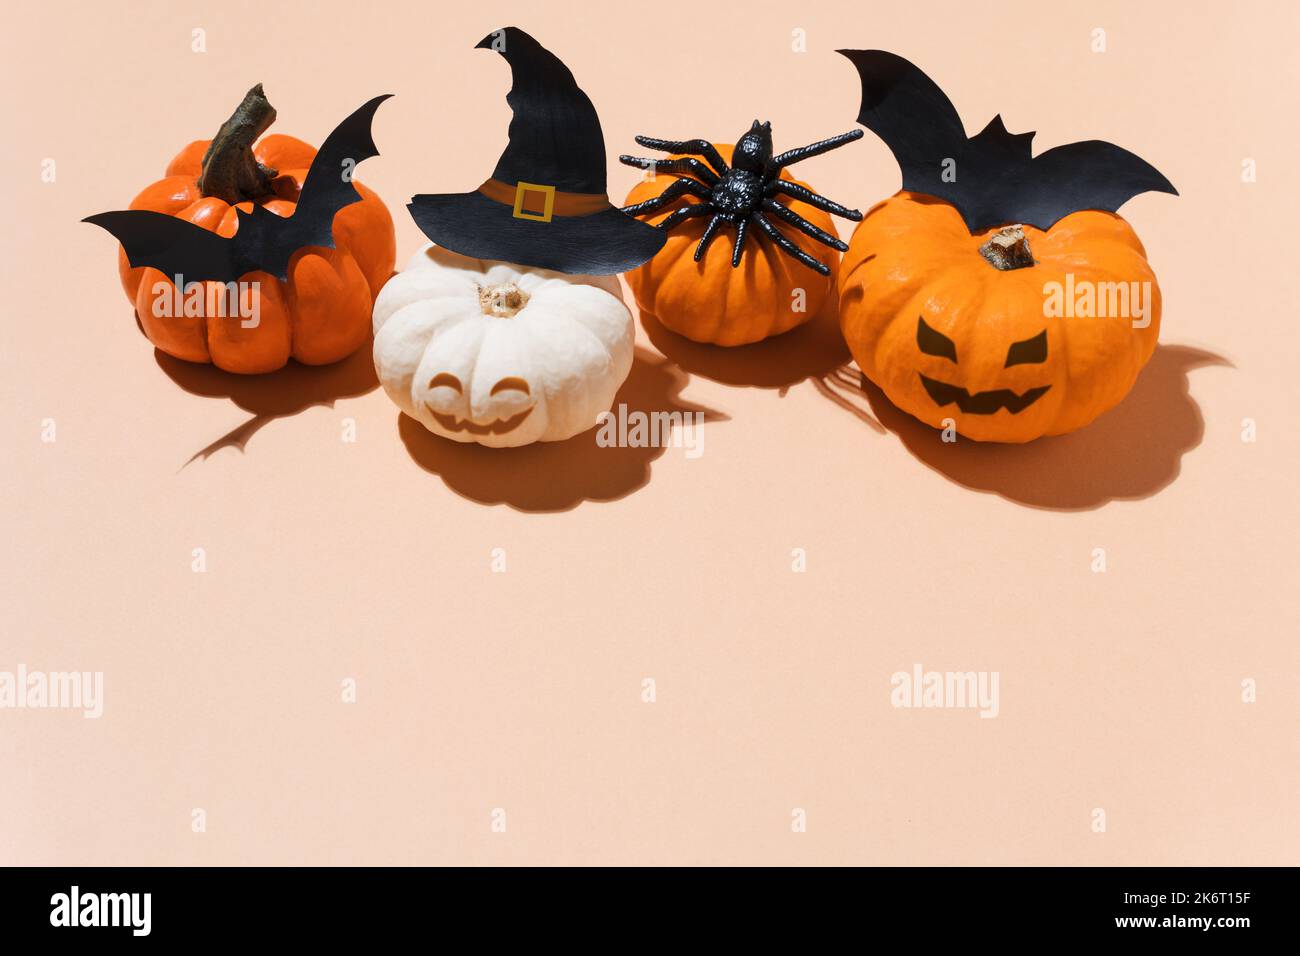 Halloween party decoration - pumpkins with bats, spiders and witch hat accessories. Pumpkin Halloween decoration idea. Copy space, blogs, promotion, s Stock Photo